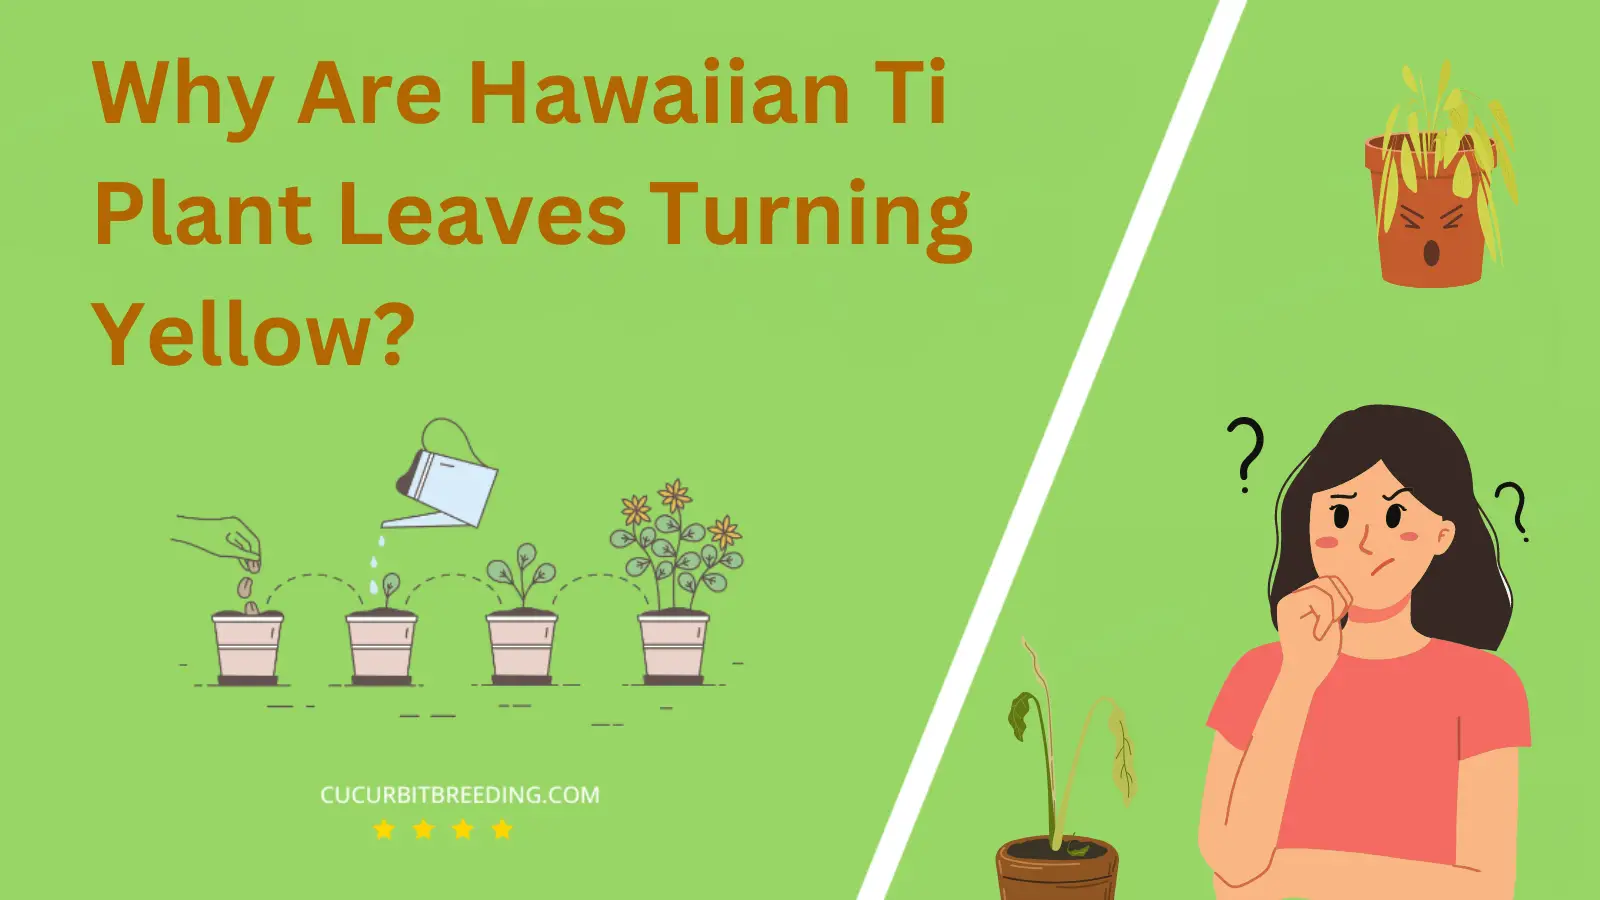 Why Are Hawaiian Ti Plant Leaves Turning Yellow